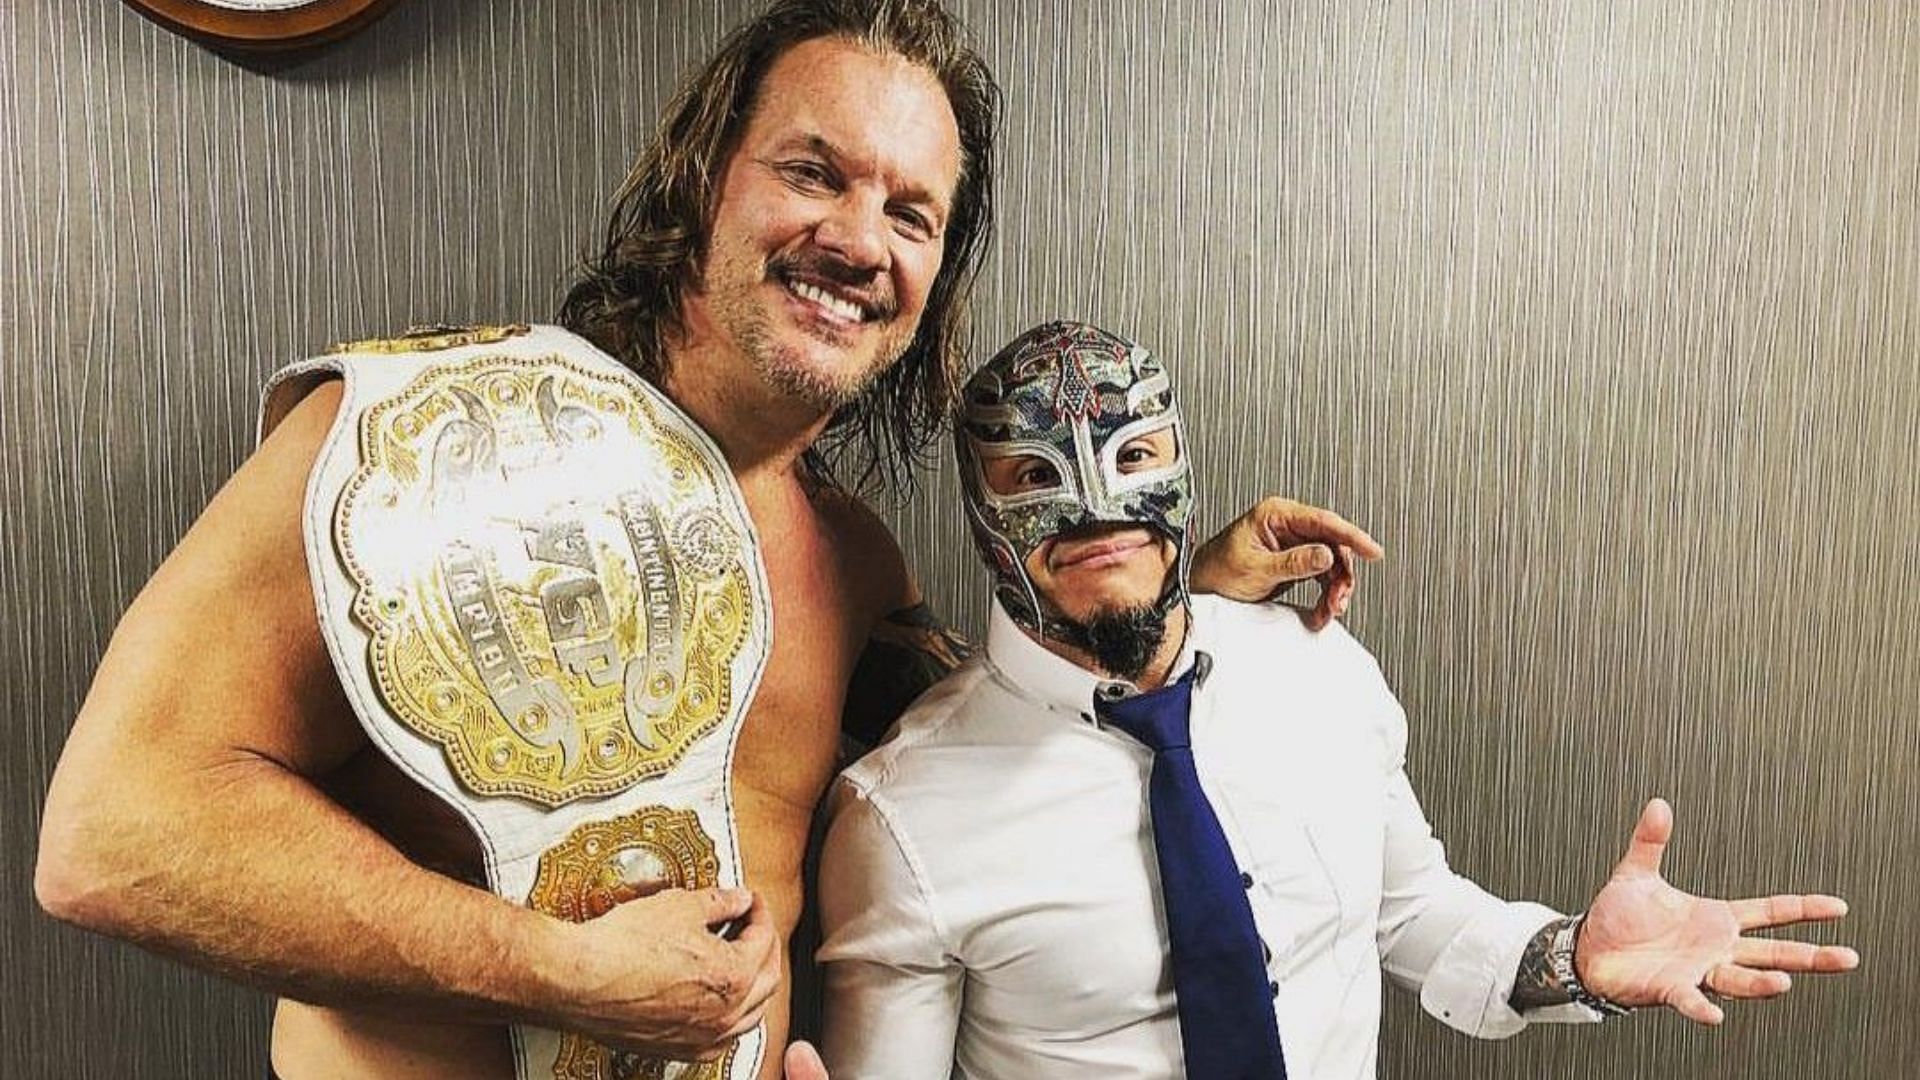 The two veterans during the celebration of Jericho&#039;s IWGP Intercontinental World Championship victory